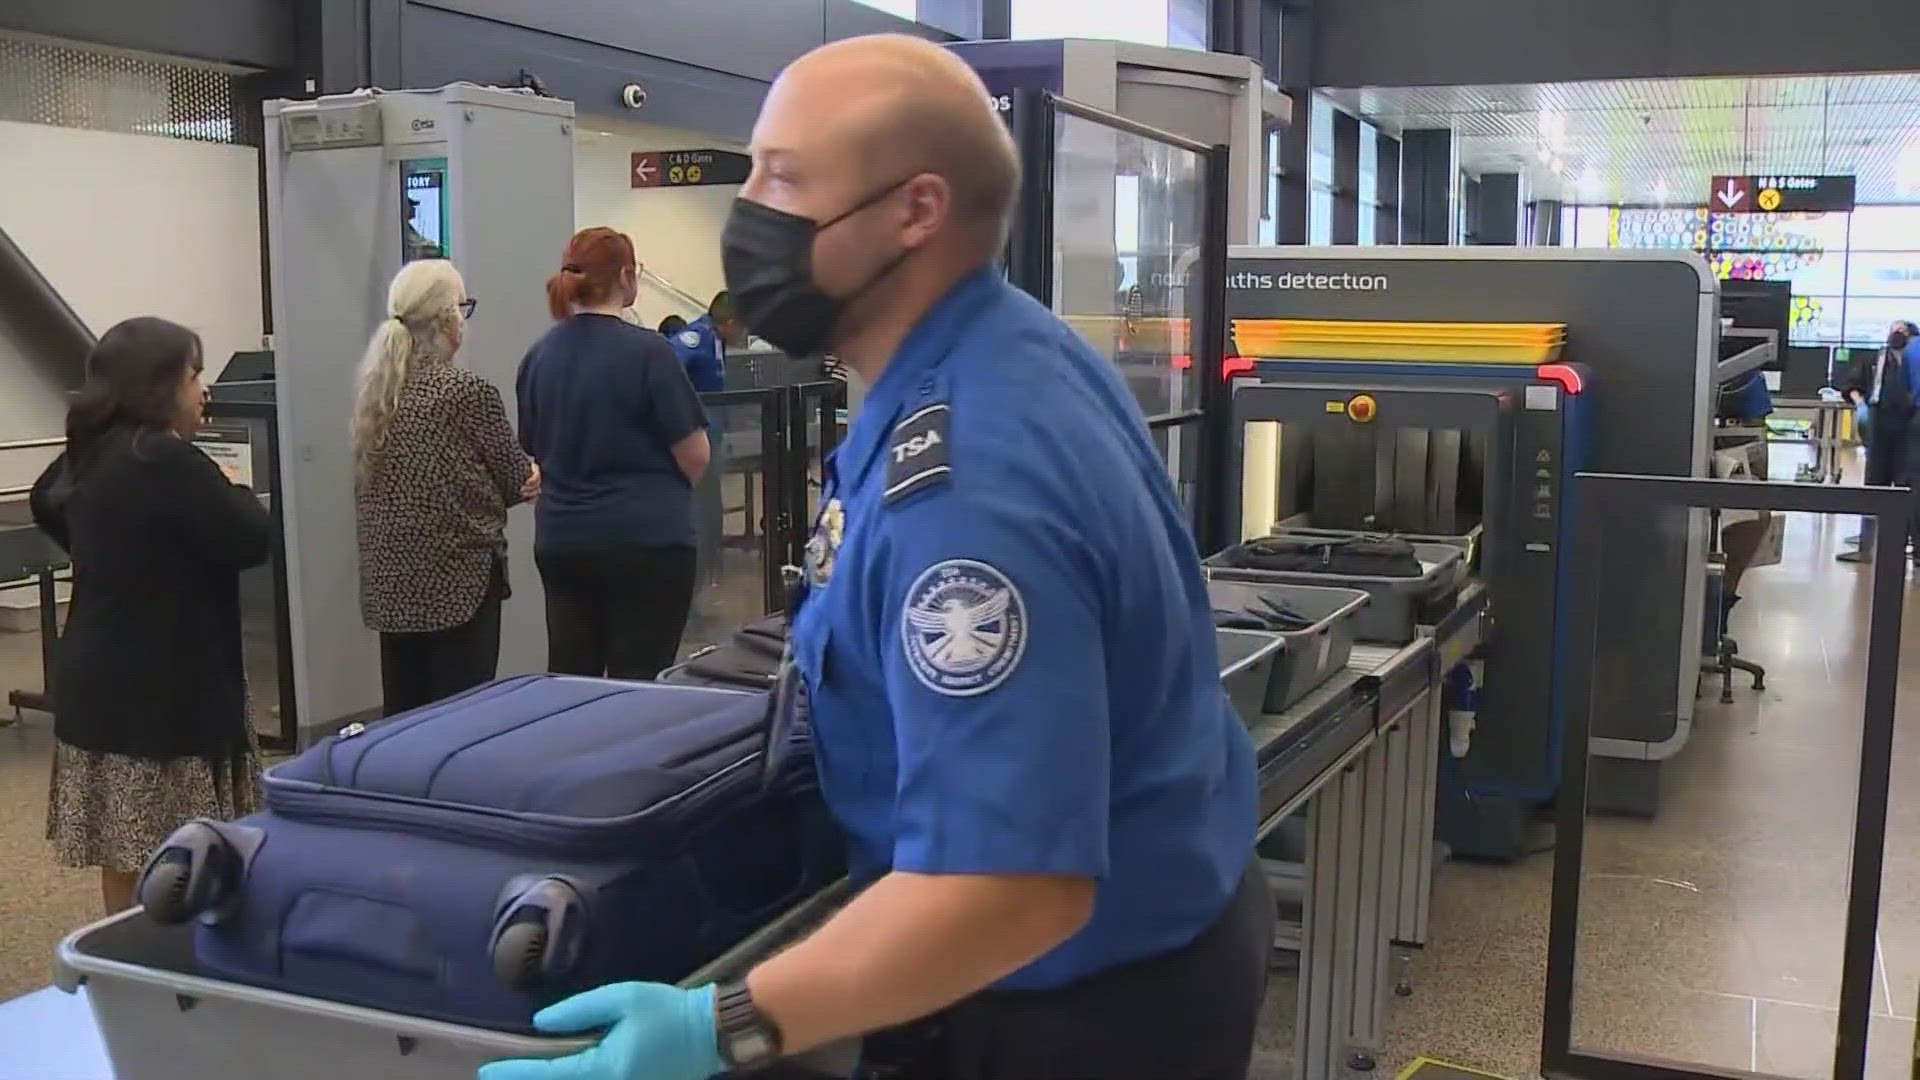 An airport safety expert said TSA will not catch everything, but the goal is to "catch enough."